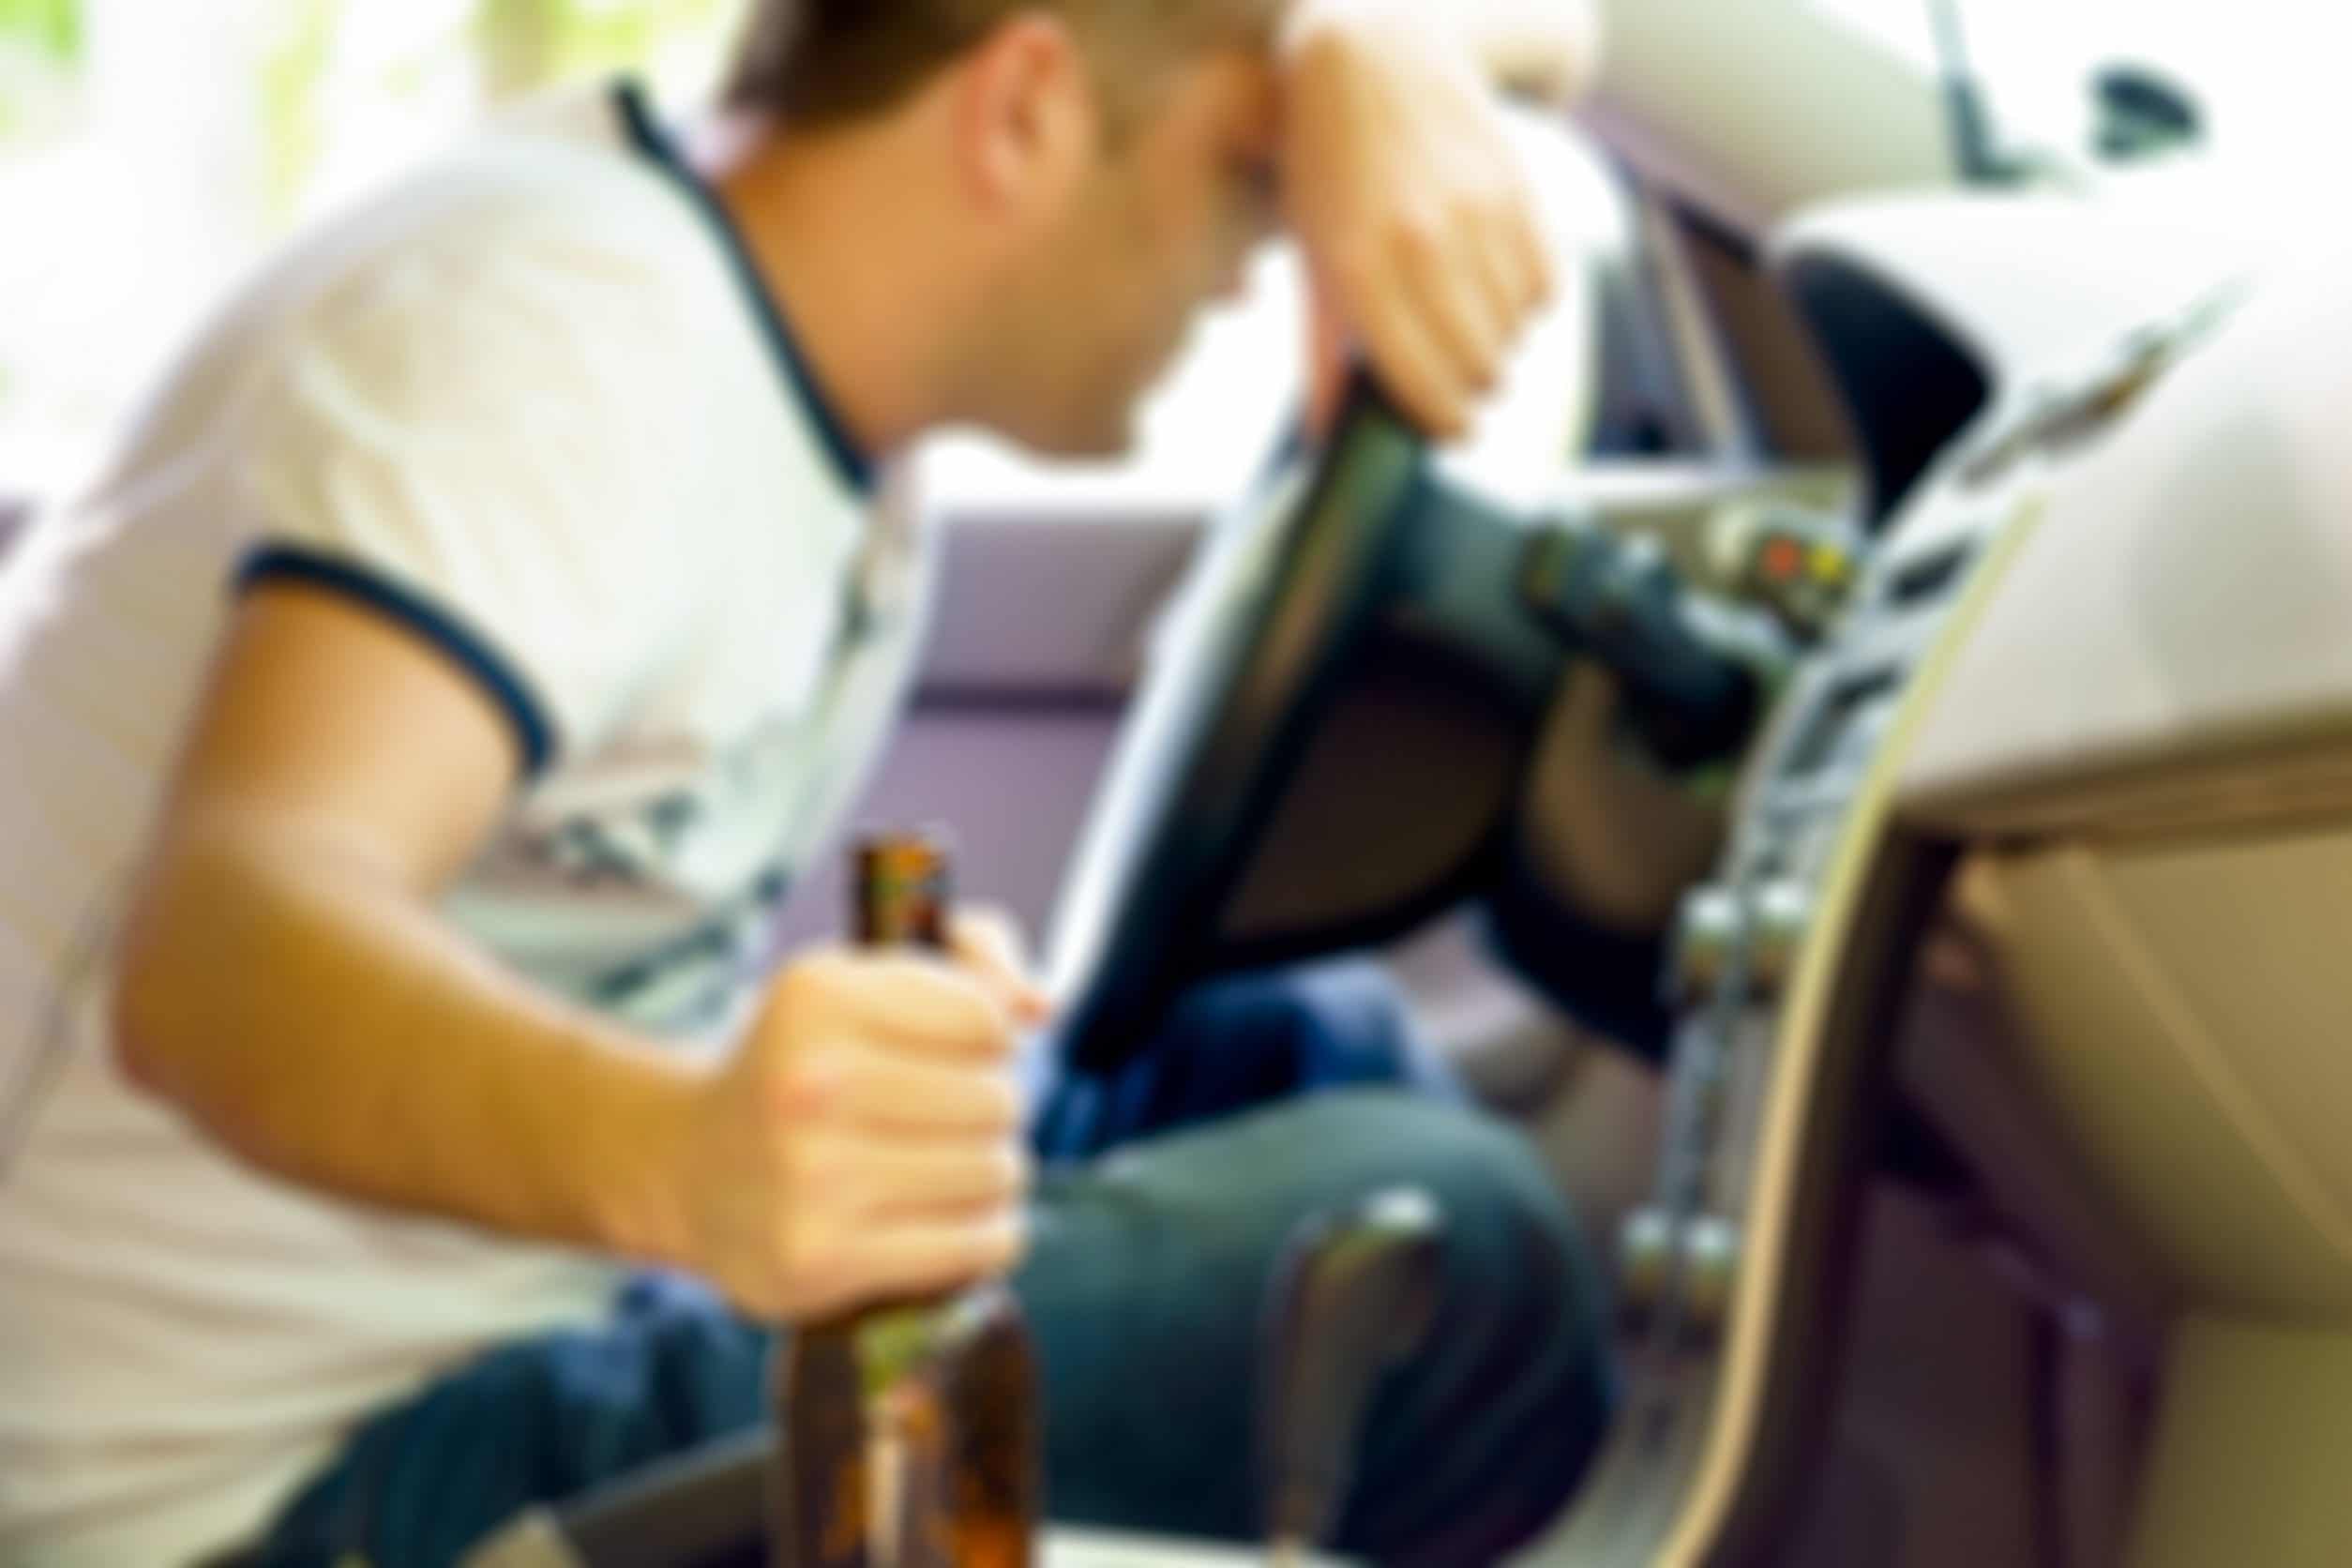 Does Sleeping in Your Car Count as a DWI in MN? |